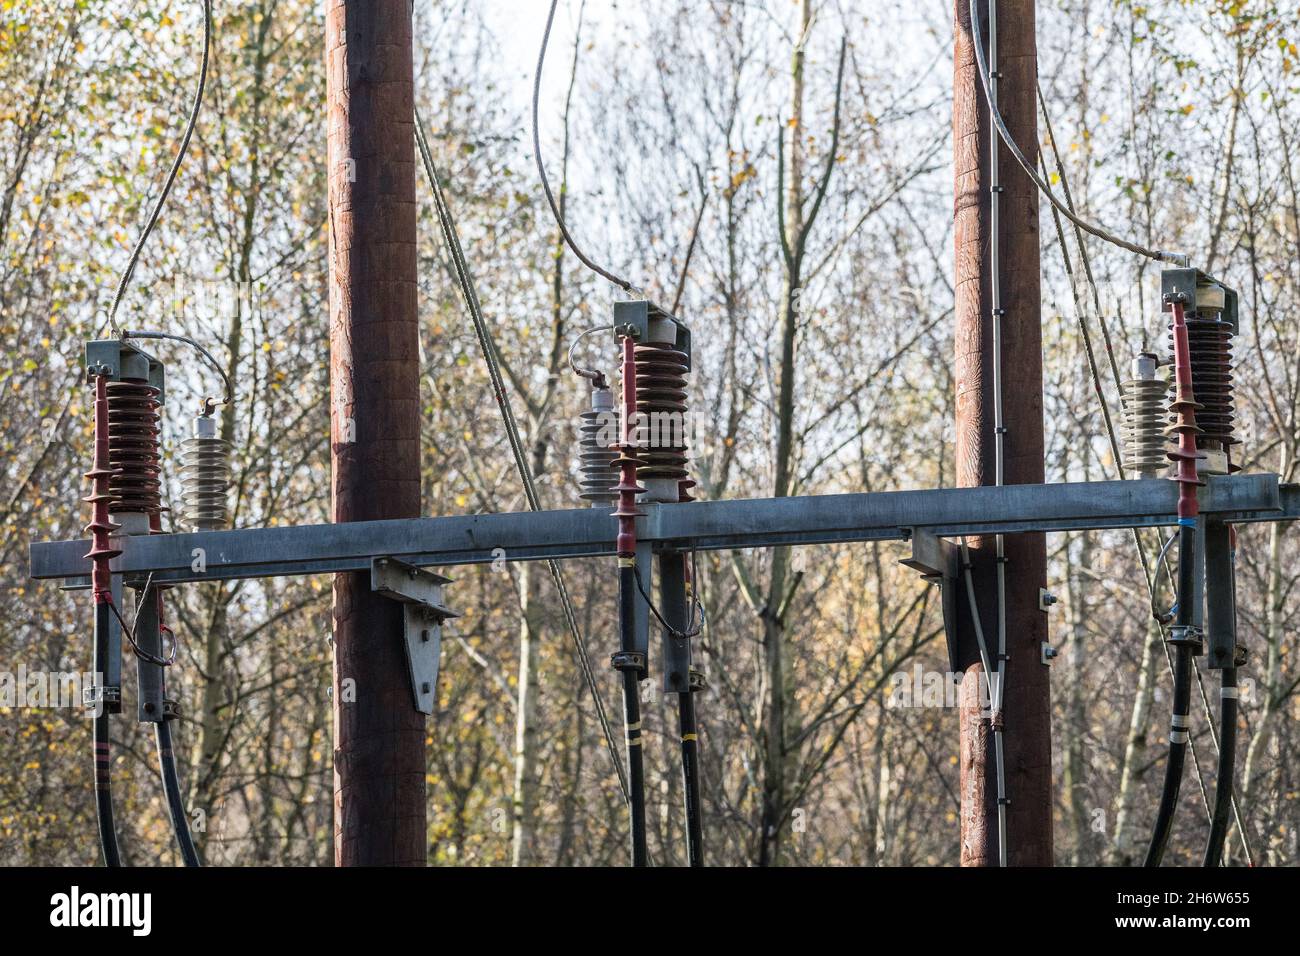 33KV overhead electrical supply mounted onto wooden poles connection to an underground supply cable. Stock Photo